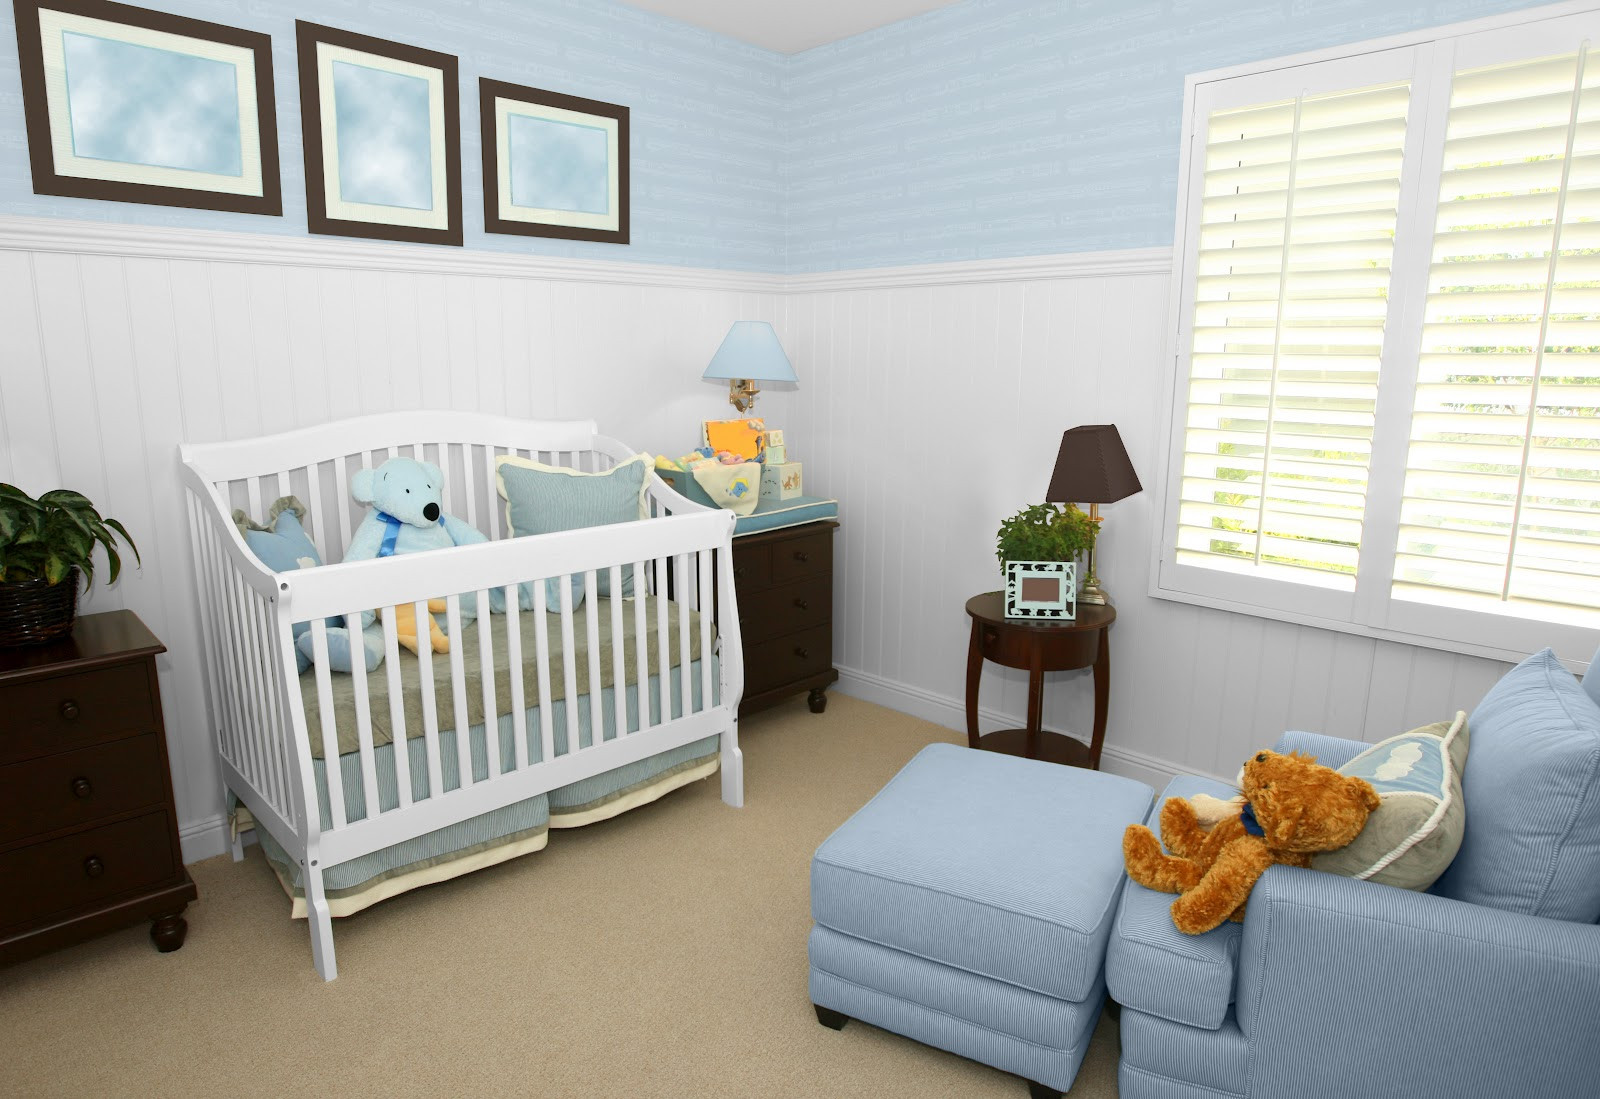 Baby Room Decoration Ideas
 Top 10 Baby Nursery Room Colors And Decorating Ideas